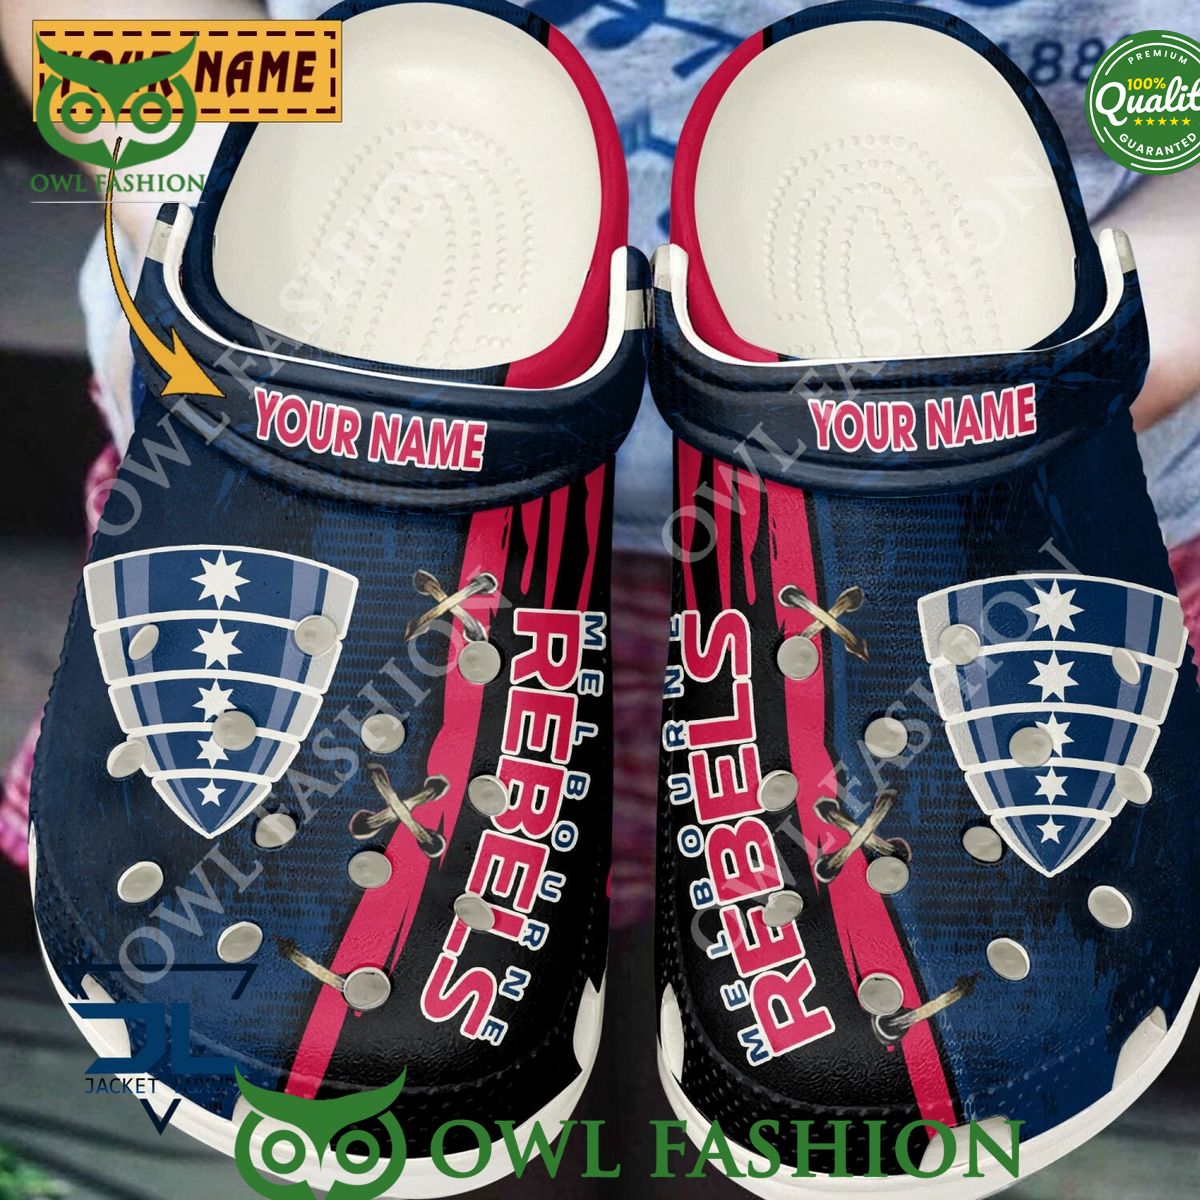 Personalized Melbourne Rebels Super Rugby union team crocs